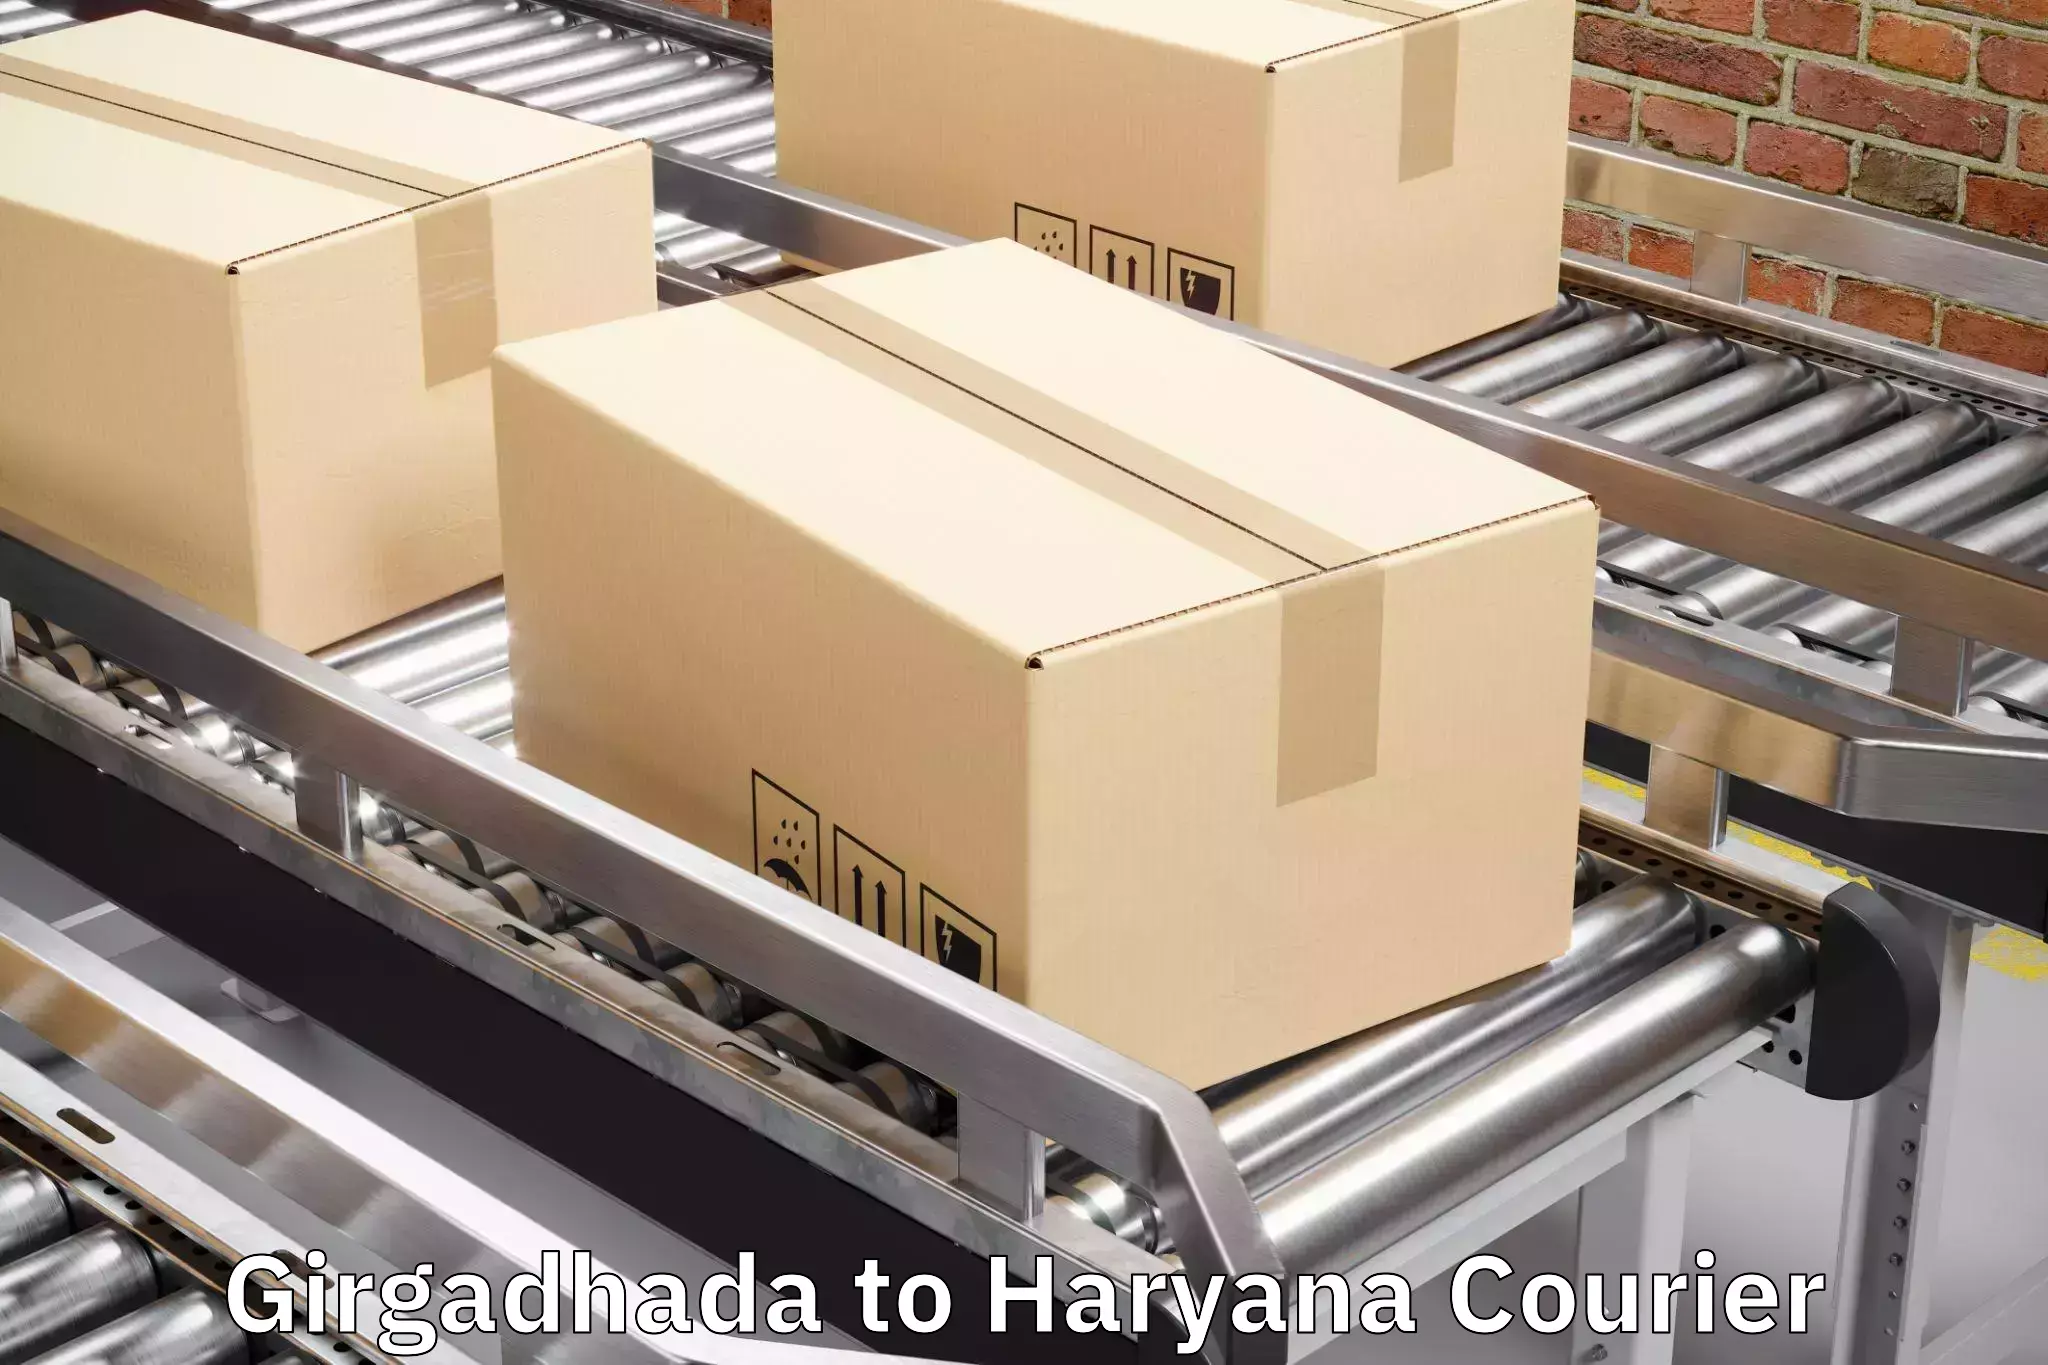 Baggage delivery planning Girgadhada to Fatehabad